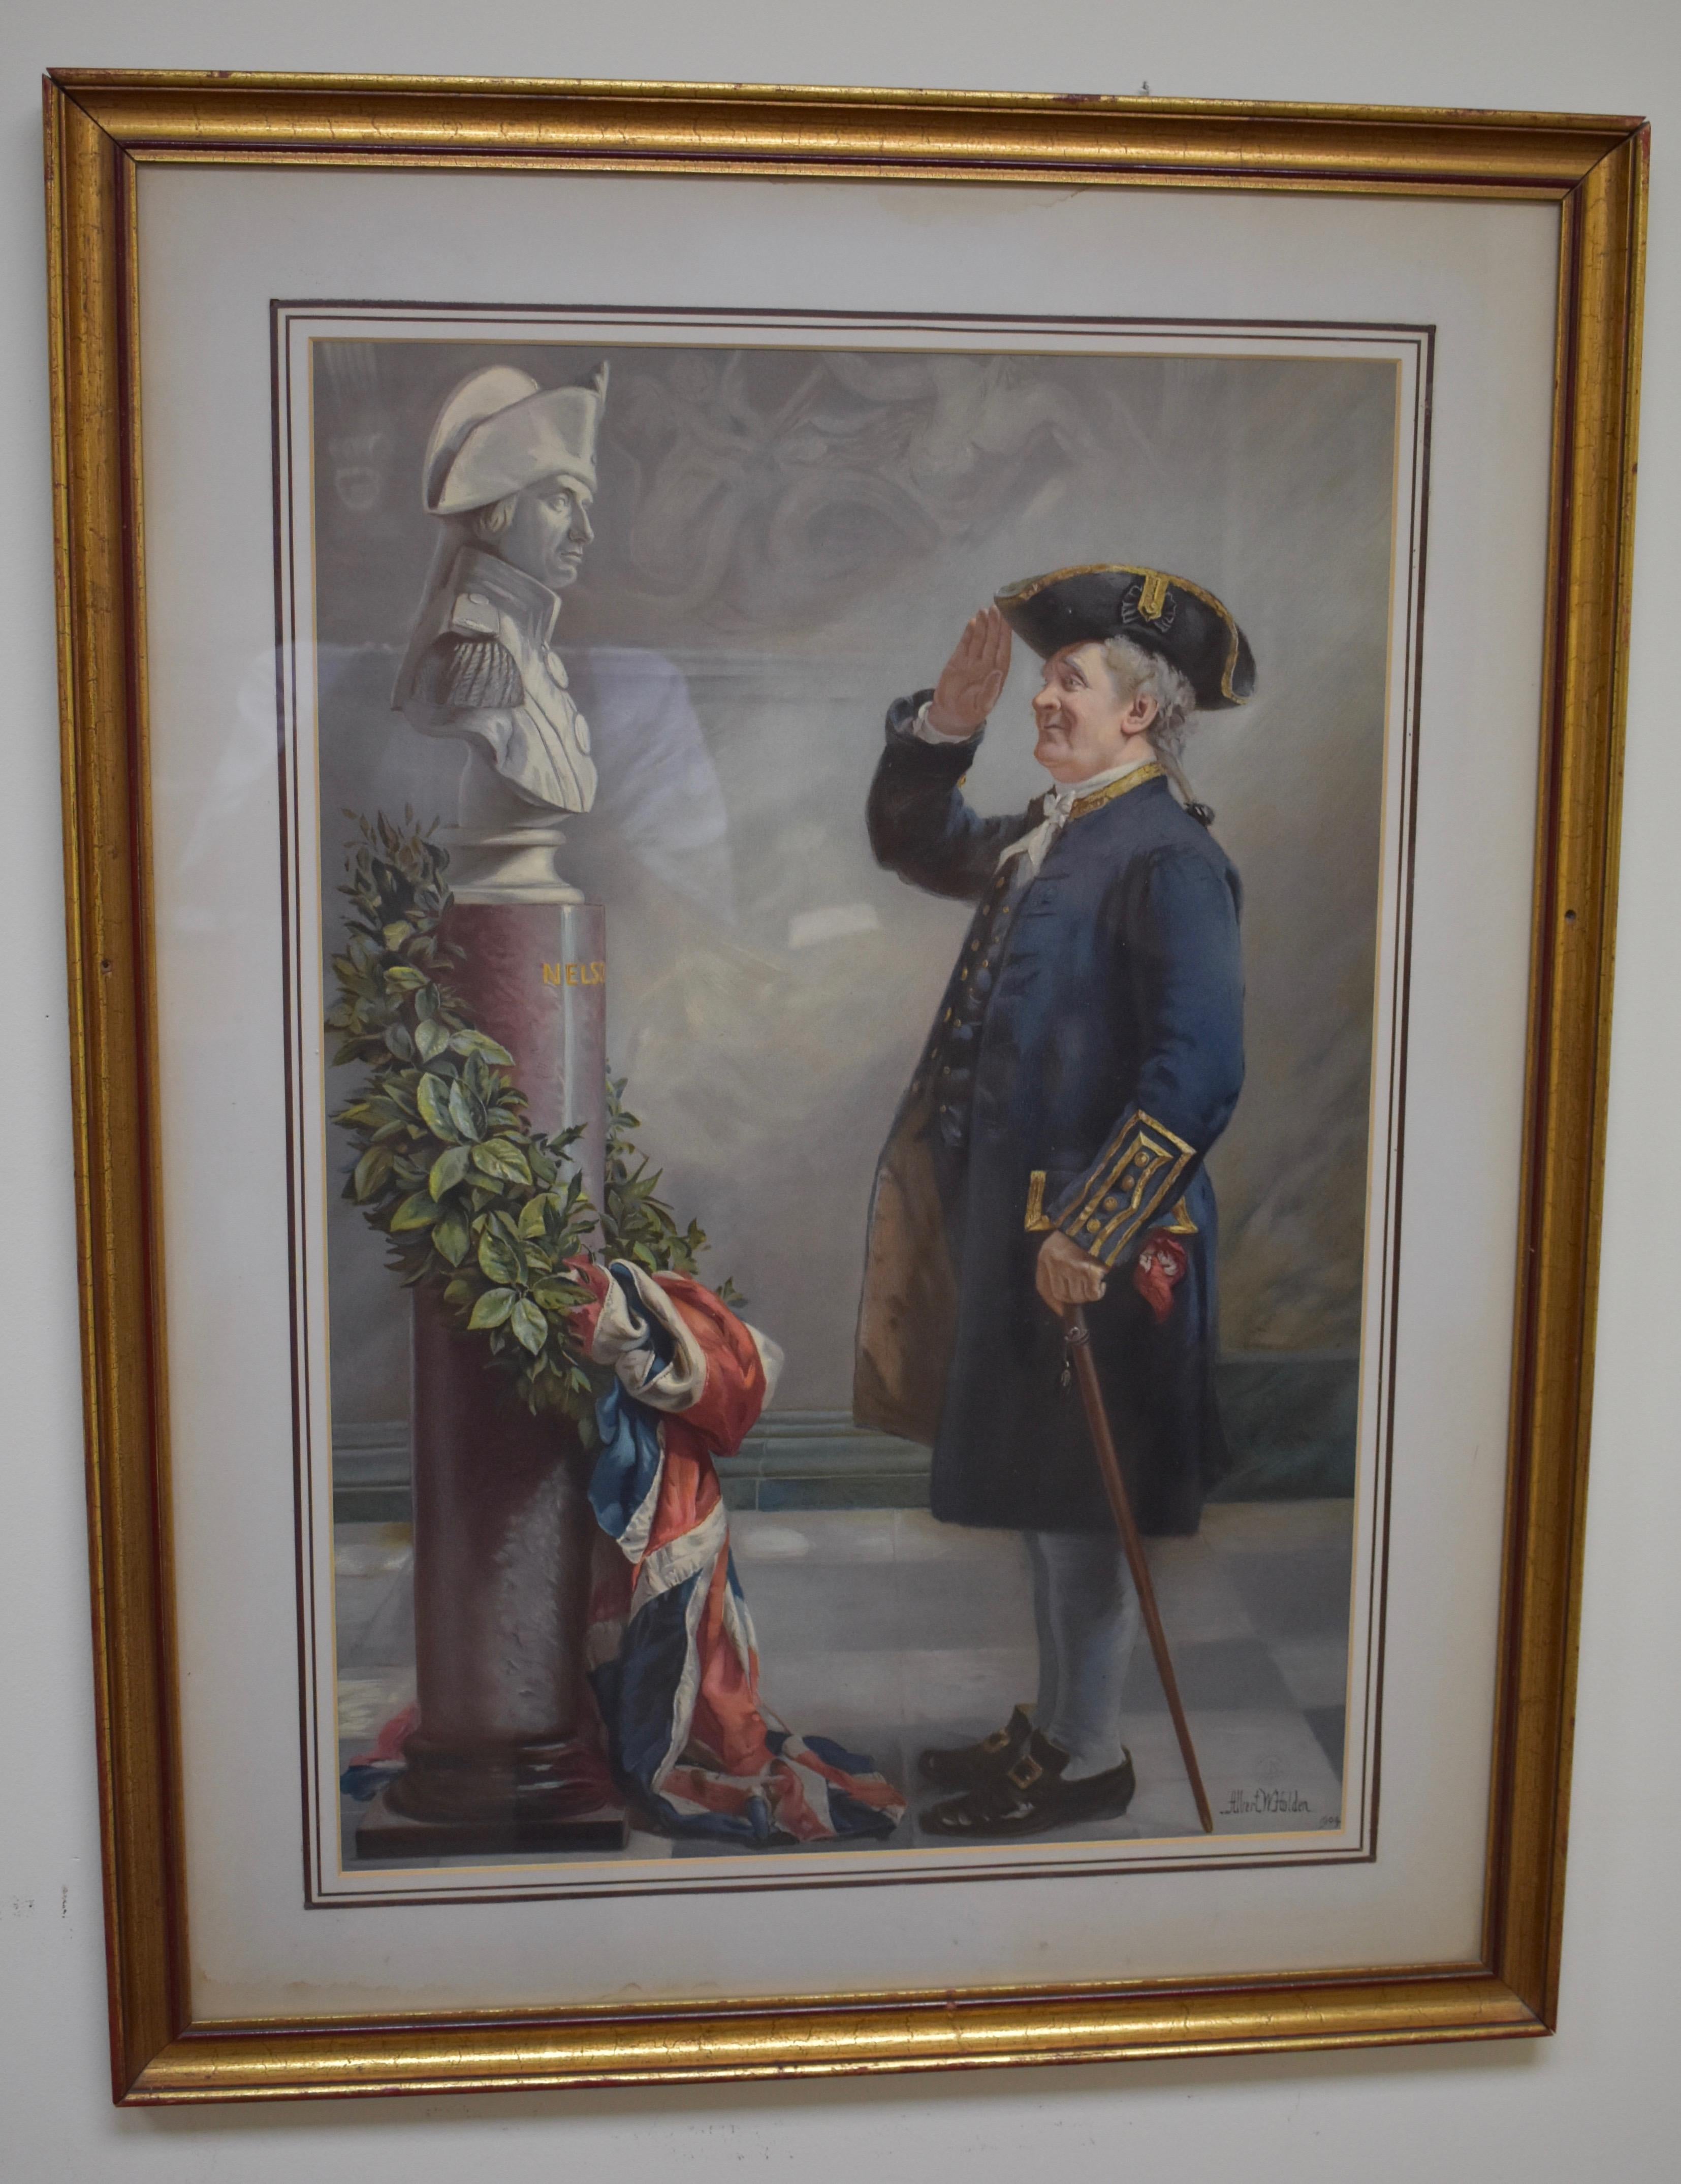 A uniformed Greenwich Pensioner stands in the Painted Hall of the Royal Hospital for Seamen at Greenwich, saluting a bust of Lord Nelson, positioned on a column decorated with a laurel wreath and union flag for Trafalgar Day.
This chromolithograph